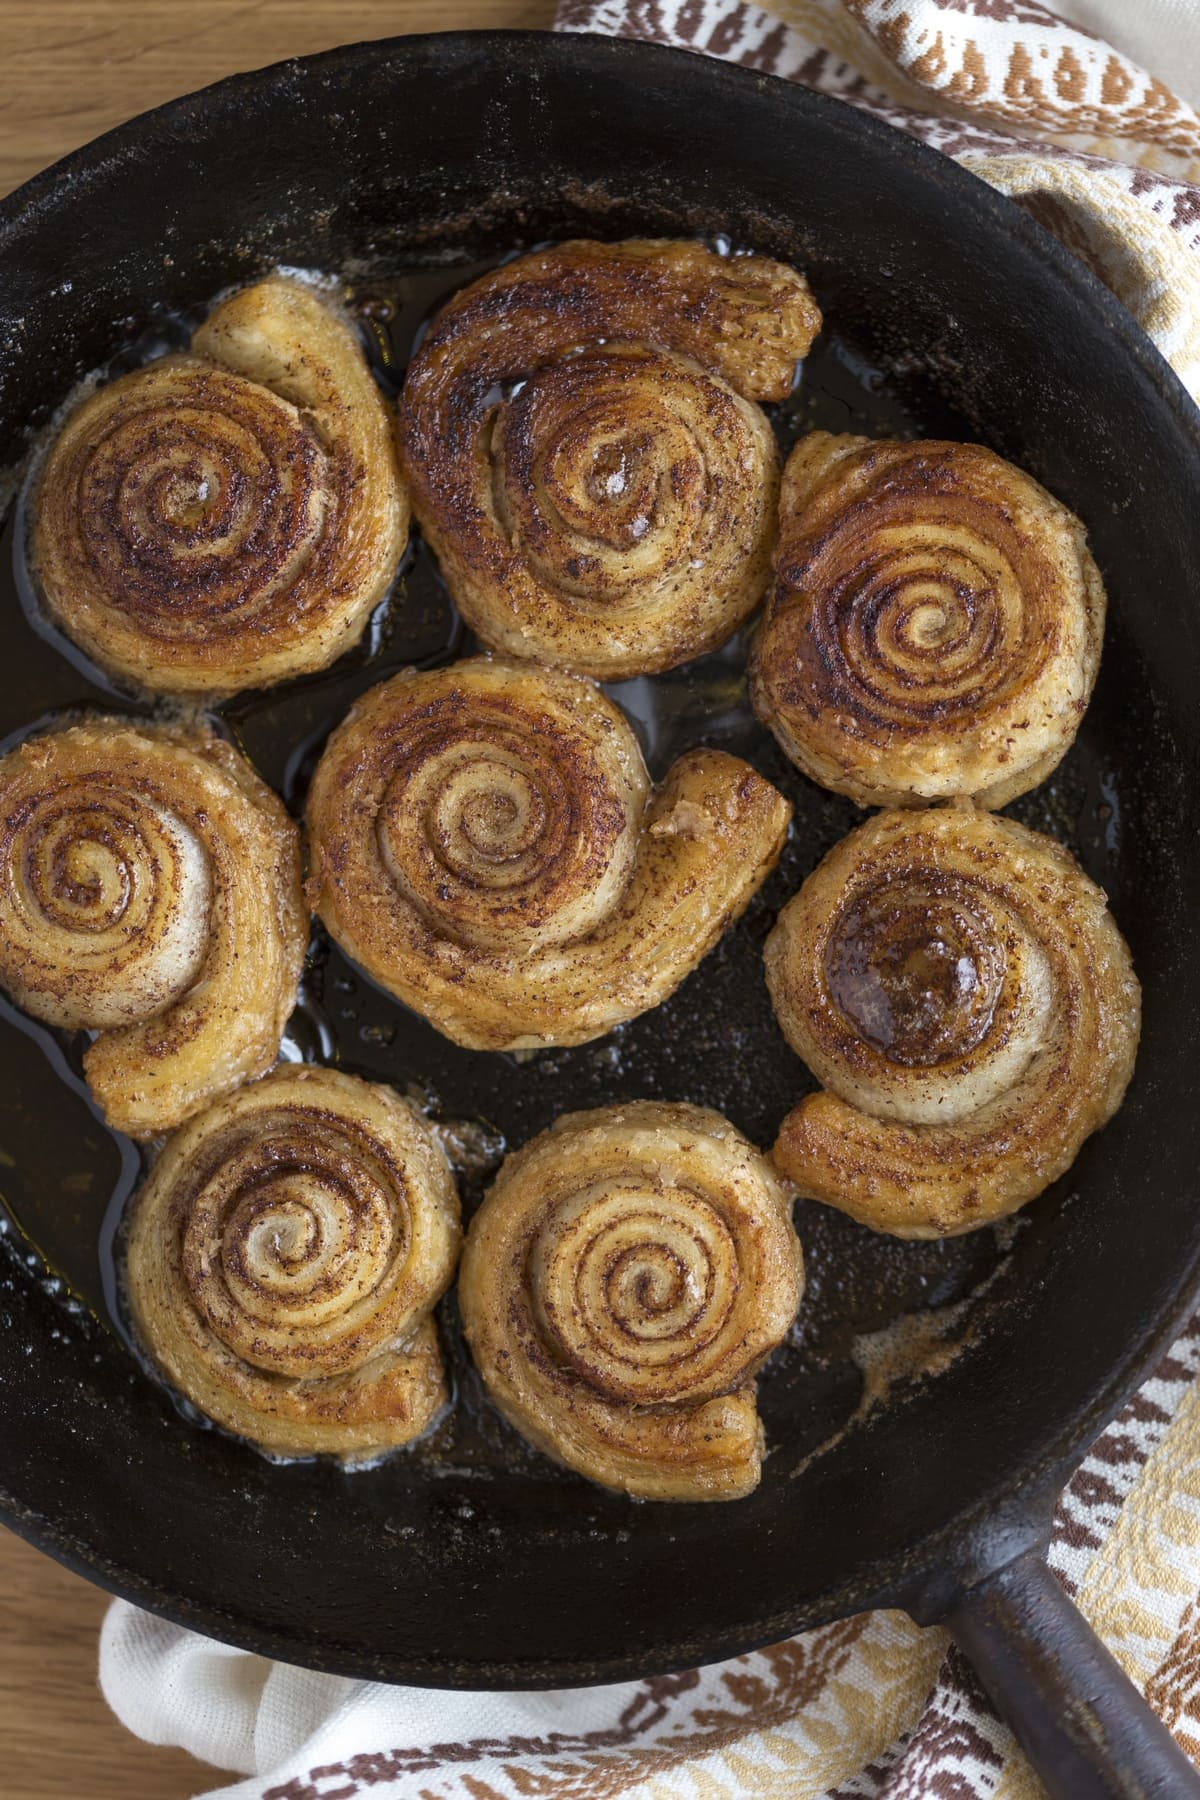 Skillet cinnamon rolls made with puff pastry.